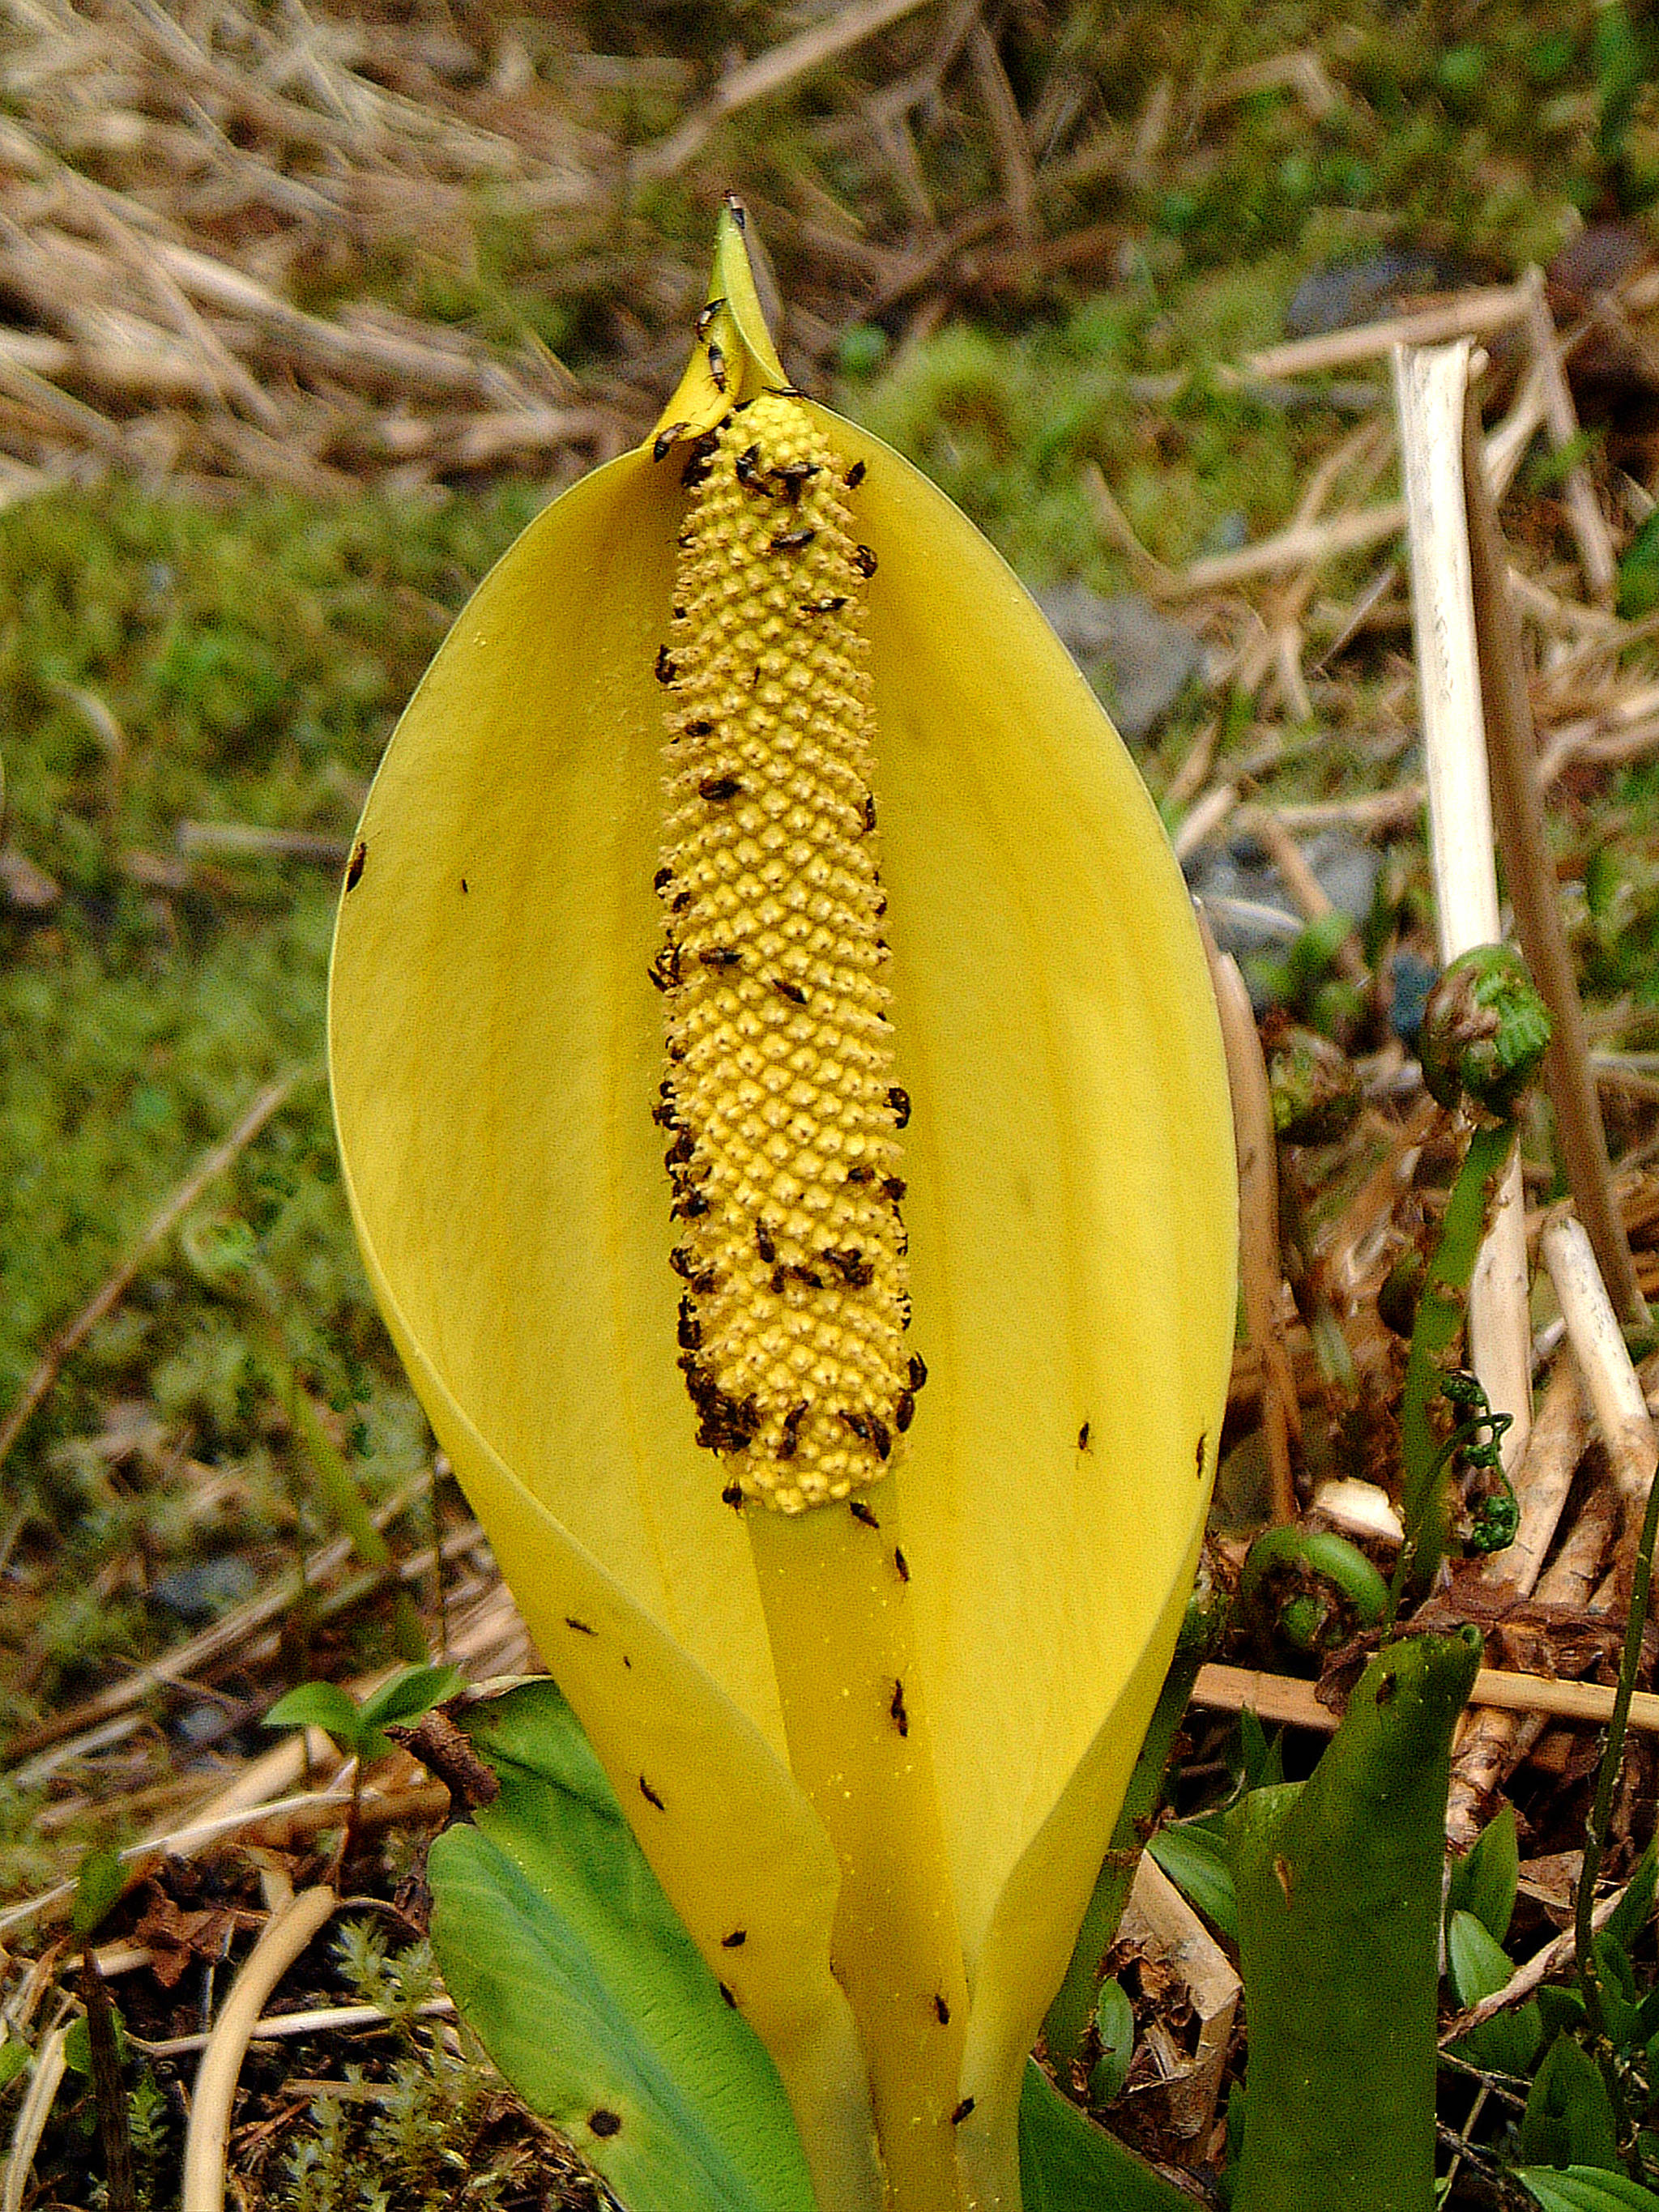 A locally common rove beetle visits skunk cabbage inflorescences, feeding and mating there. (Courtesy Photo | Bob Armstrong)